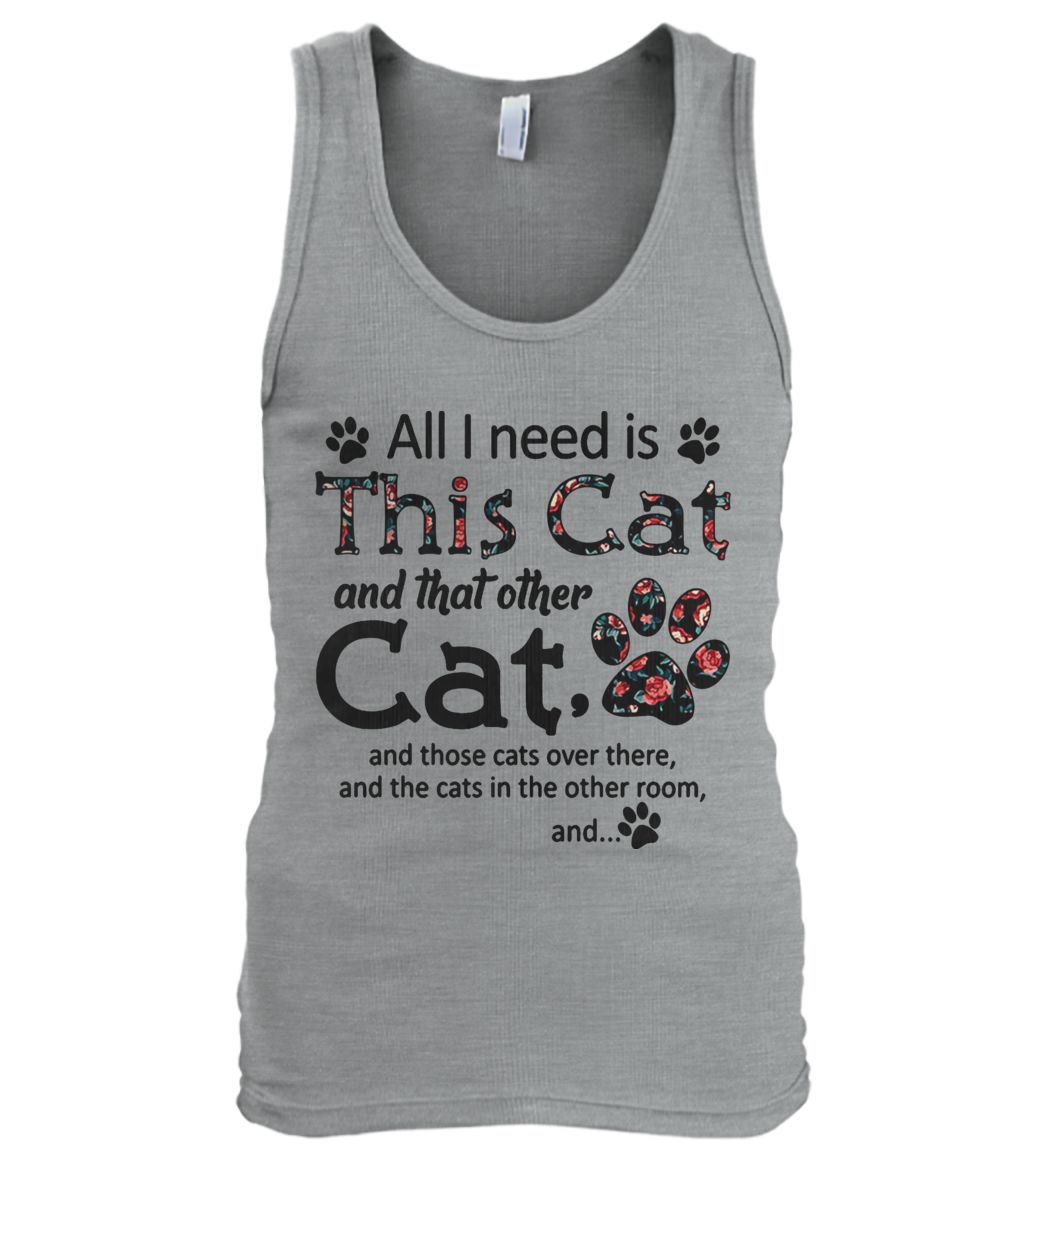 All I need is this cat and that other cat and those cats over there men's tank top